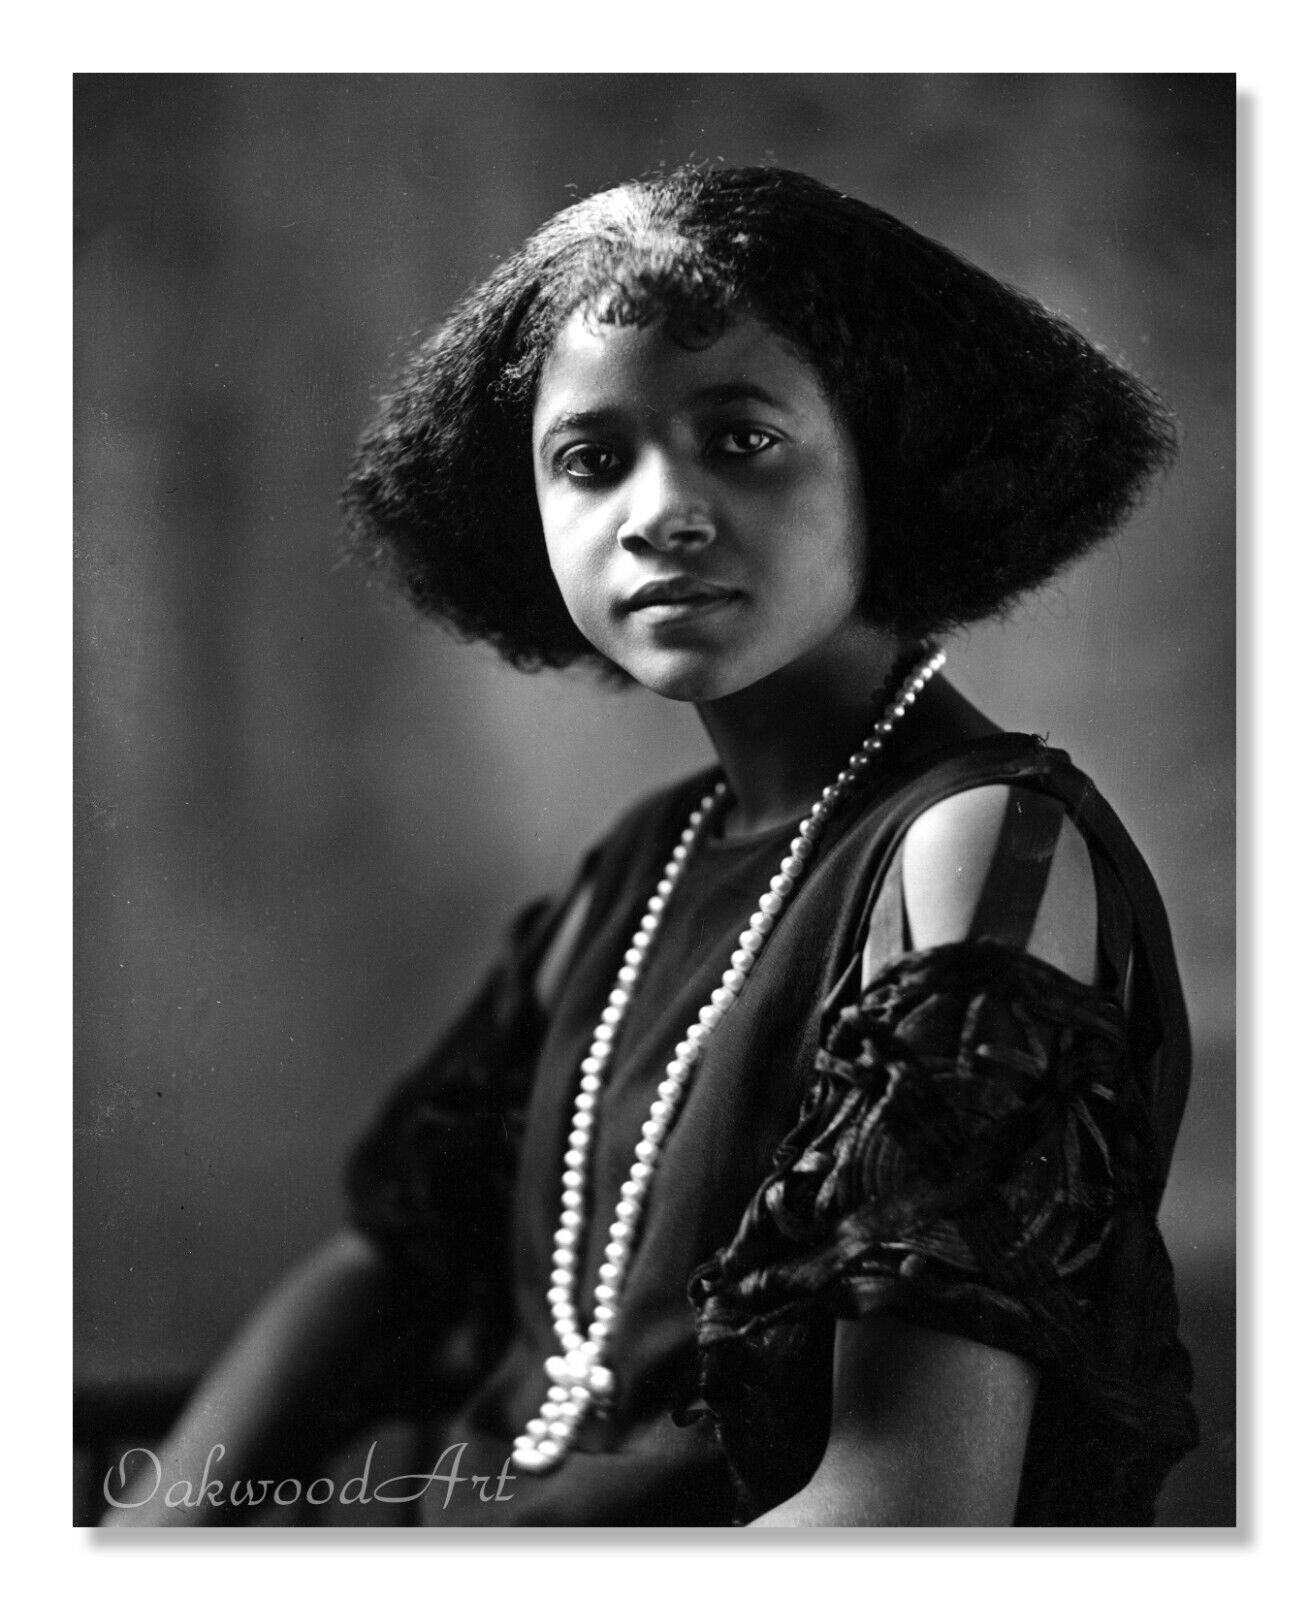 Fashionable Young Black Woman in Pearls c1920s, Vintage Photo Reprint